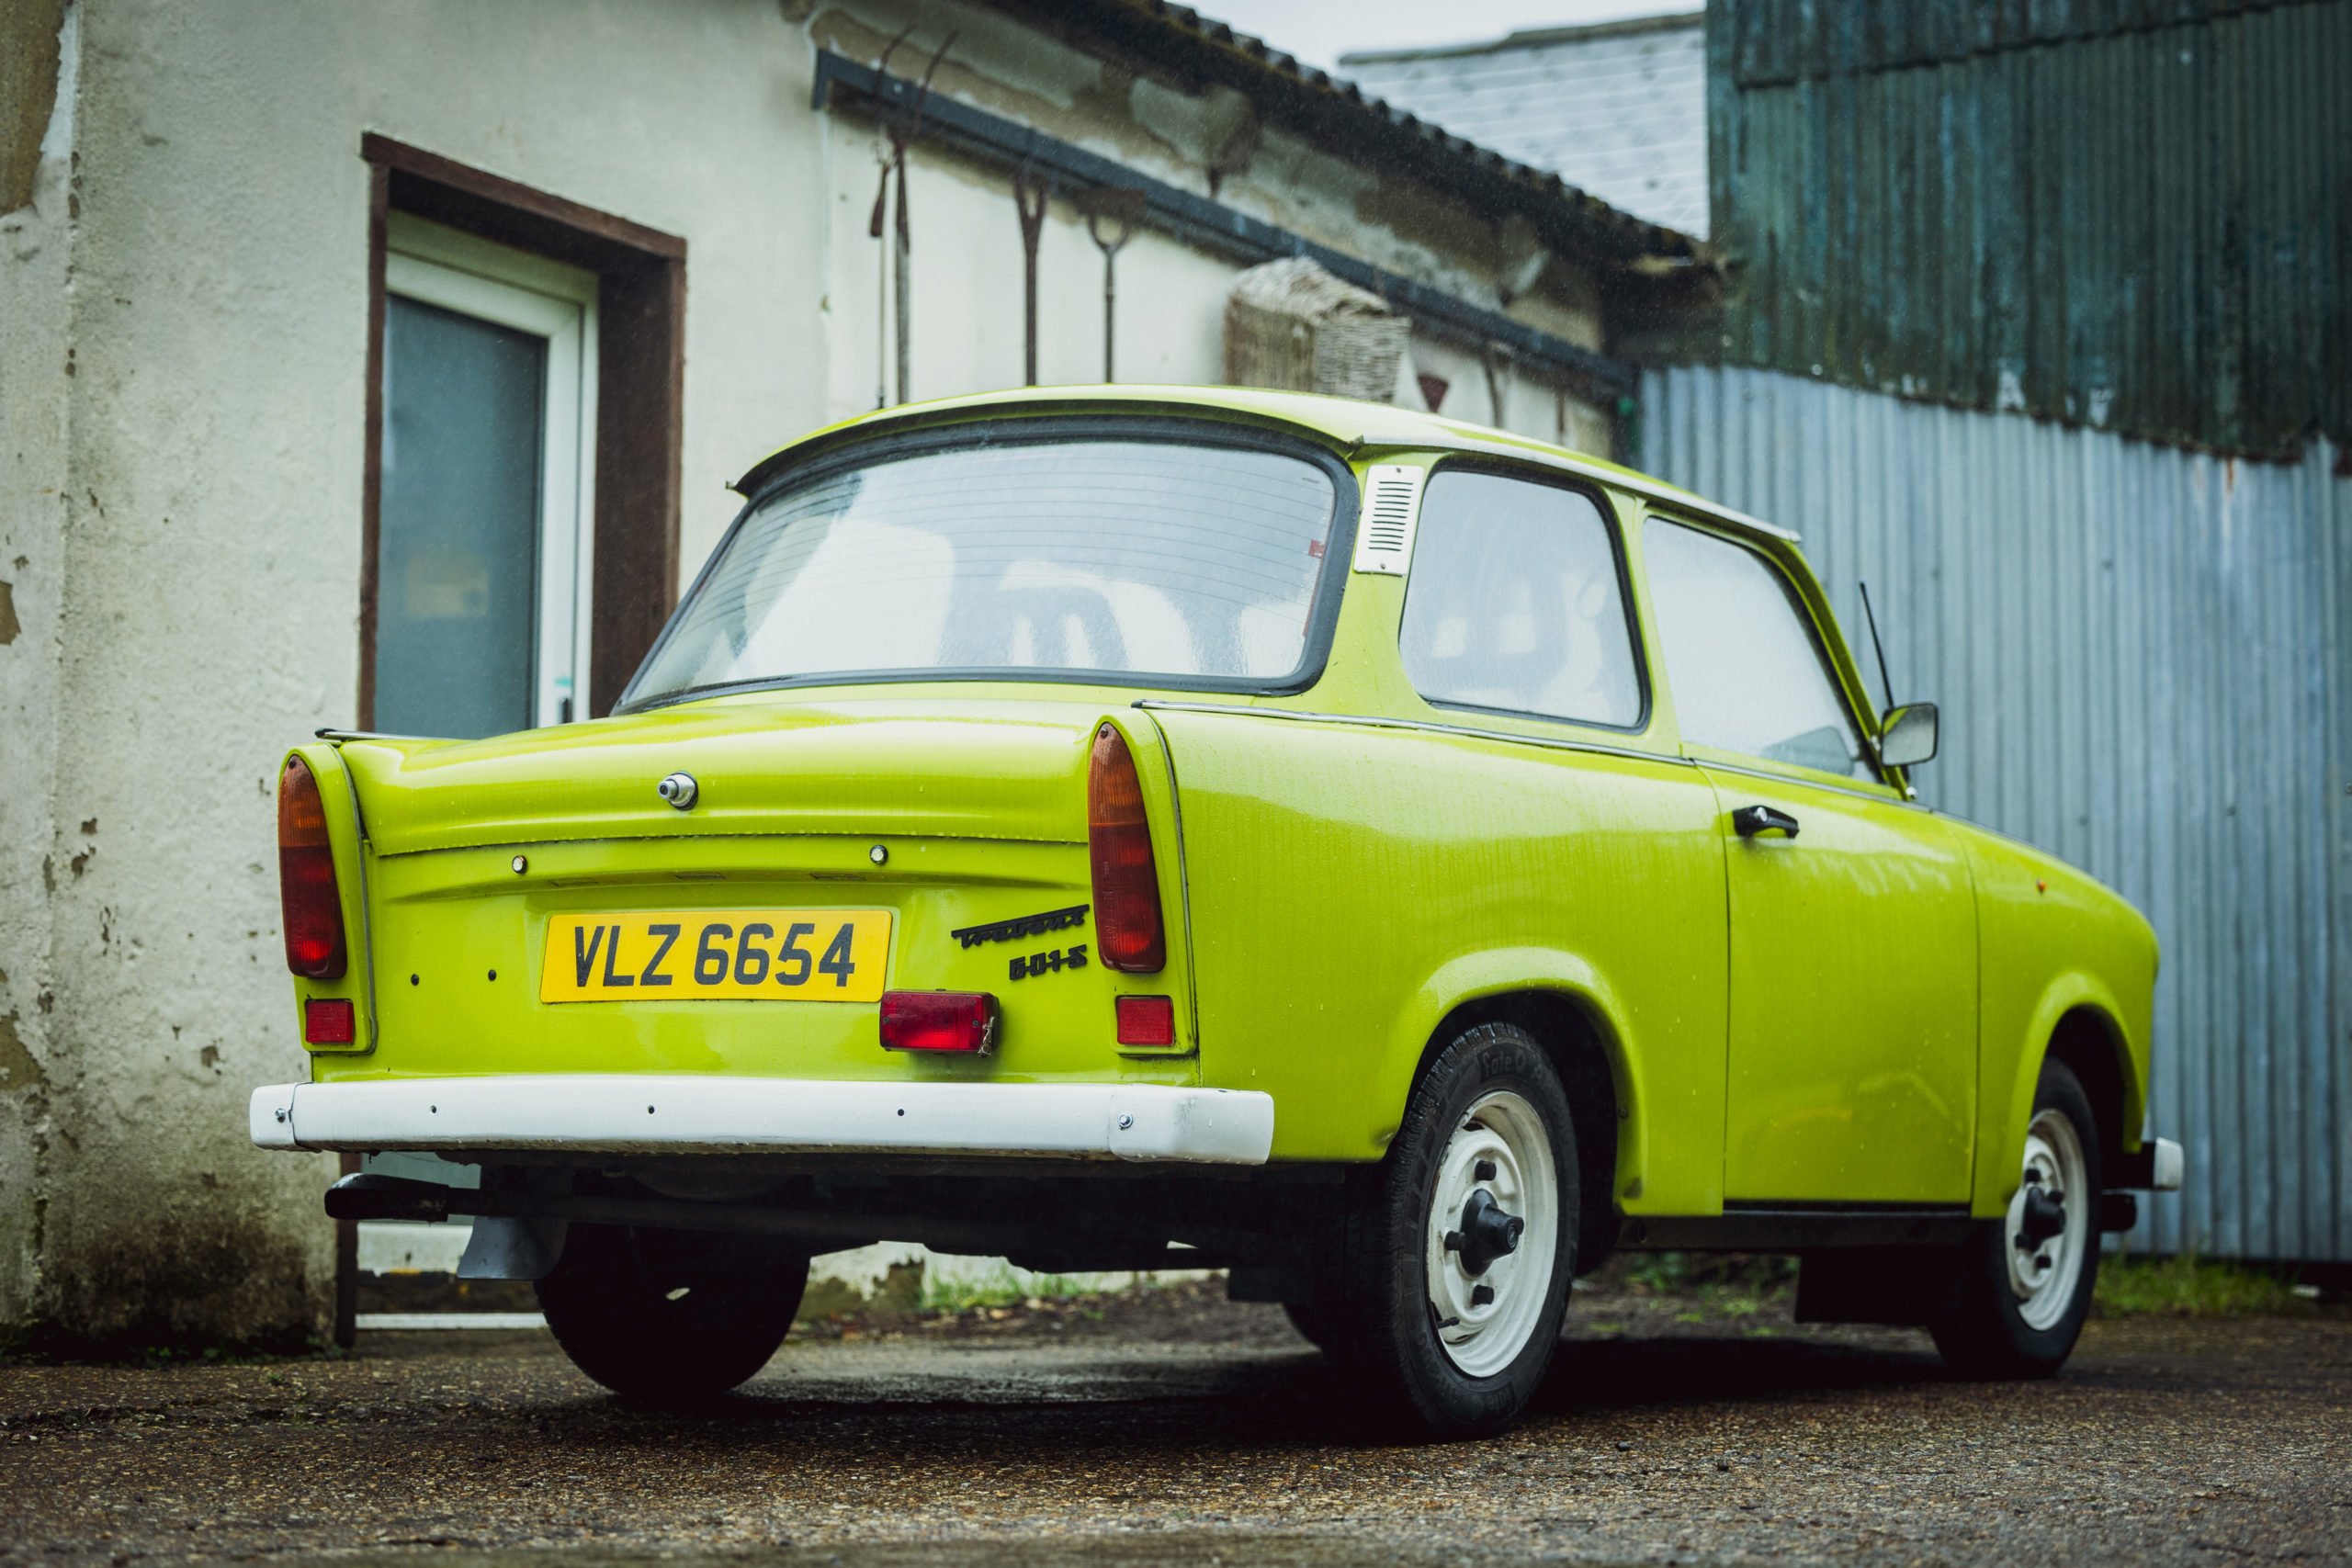 The East German Trabant 601 – The Worst Car Ever Made